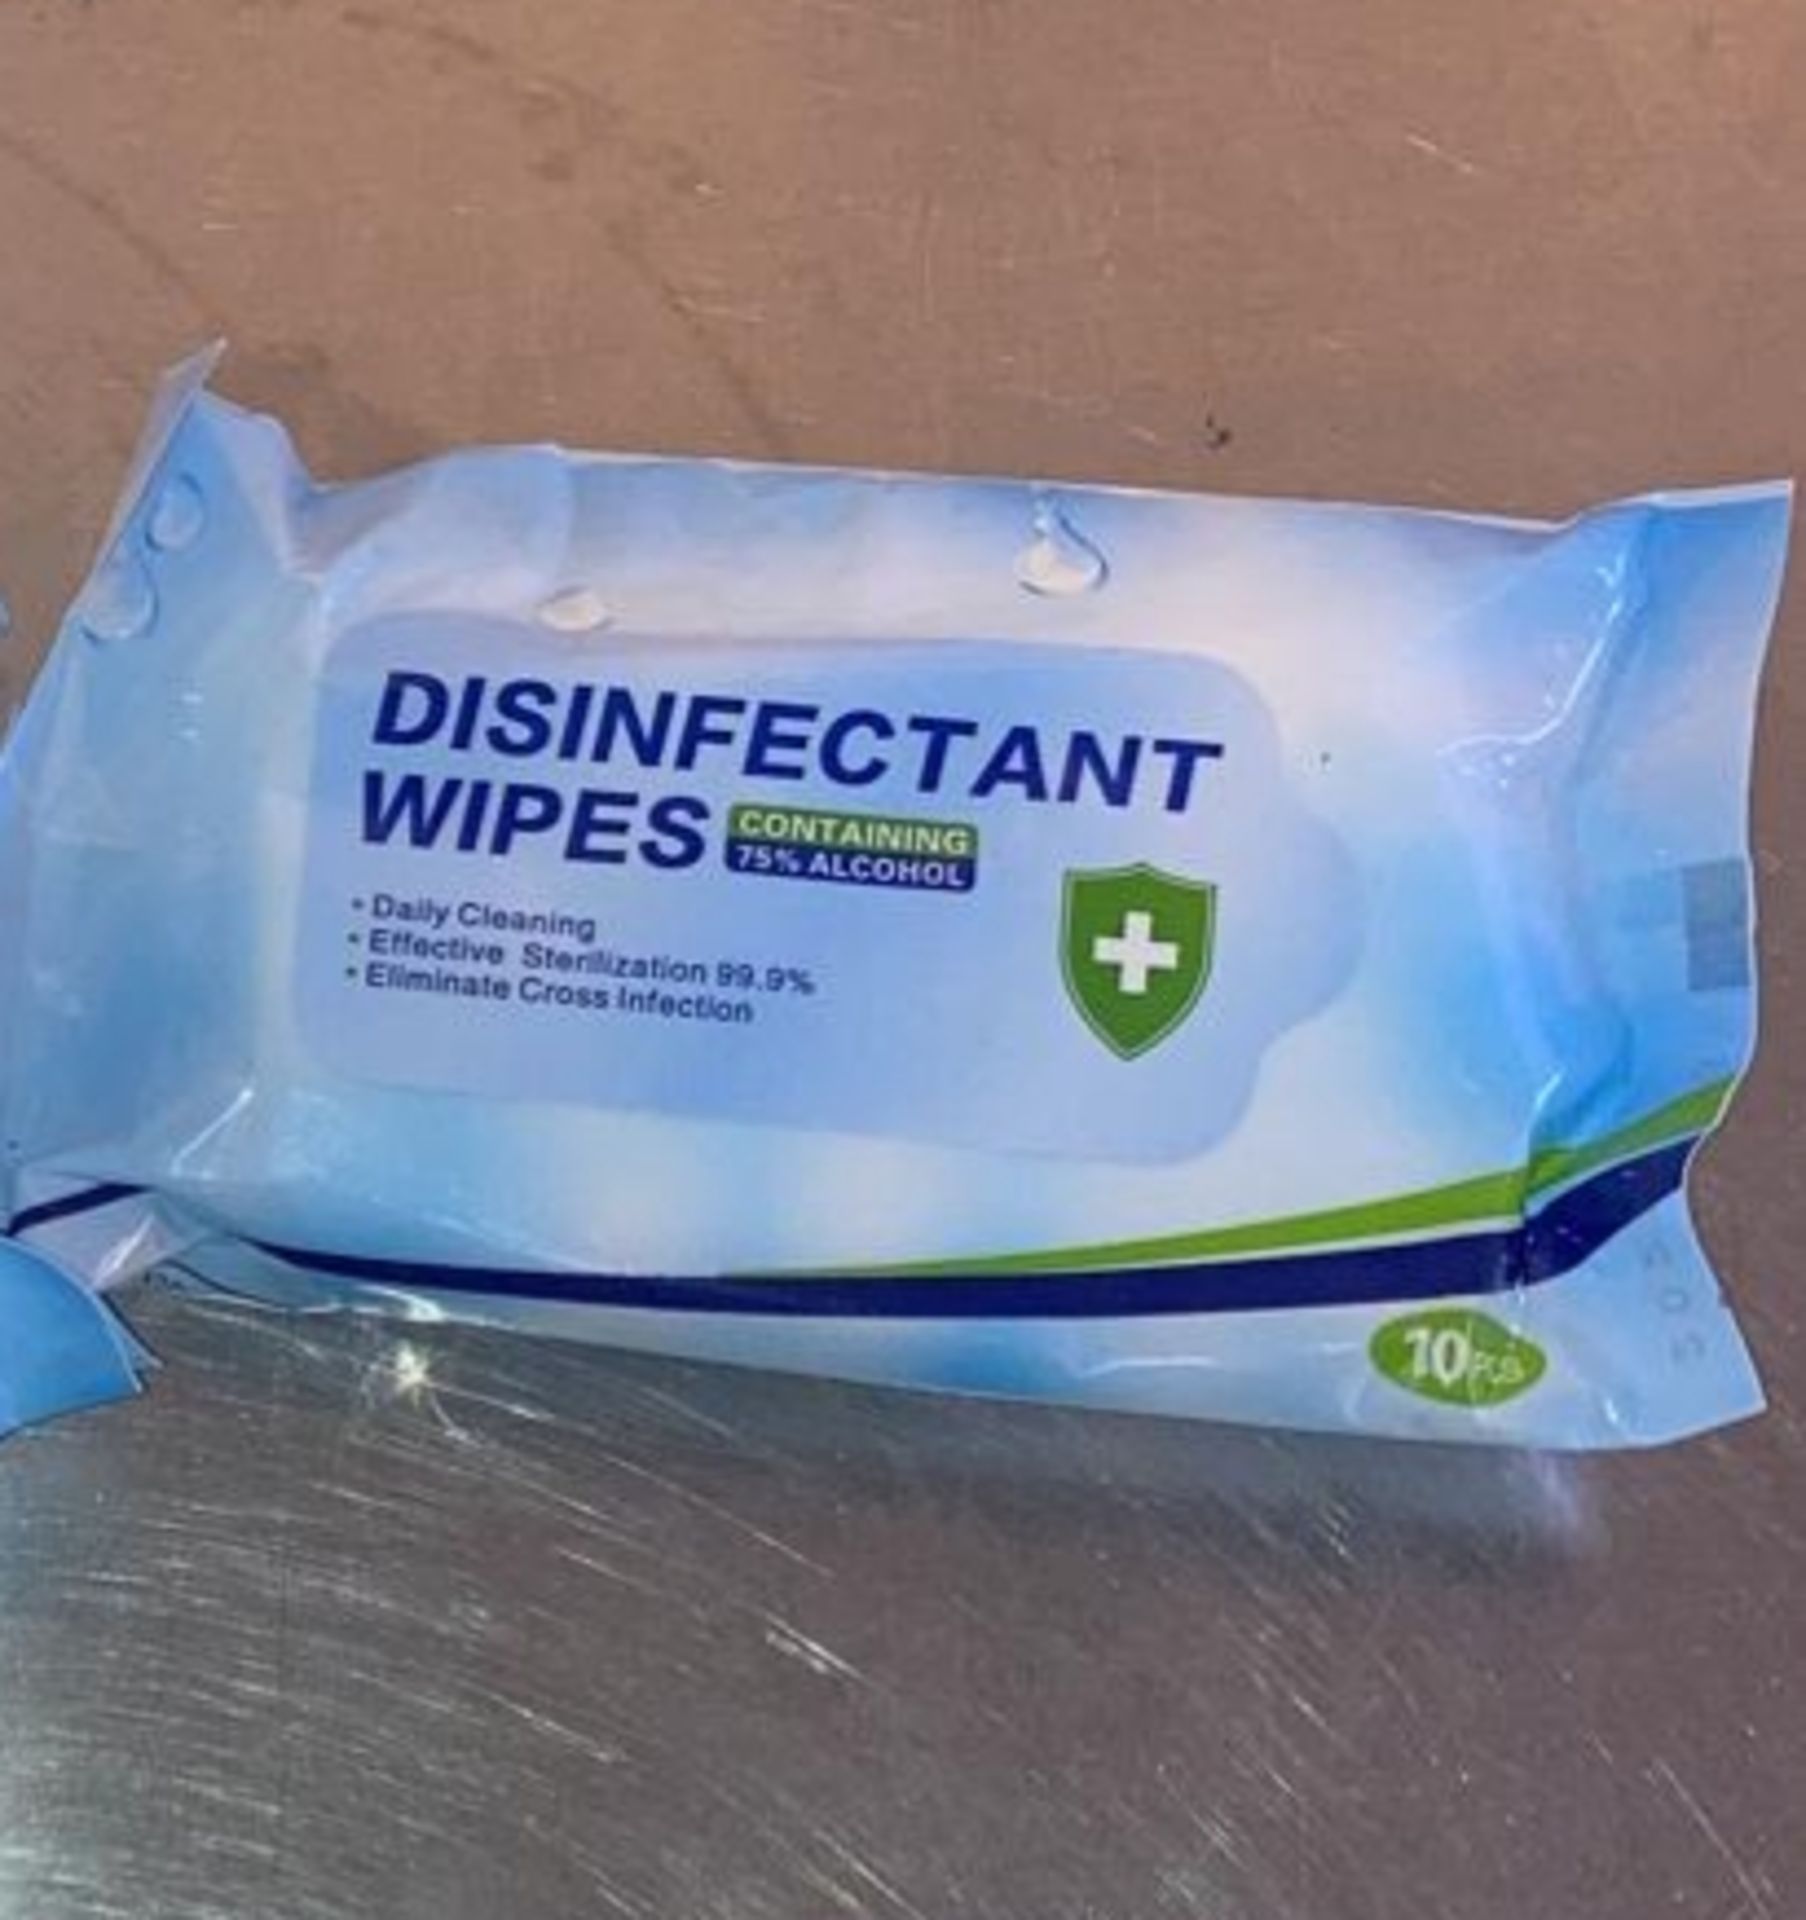 50,000 Antibacterial Disinfectant Wipes - Image 2 of 4